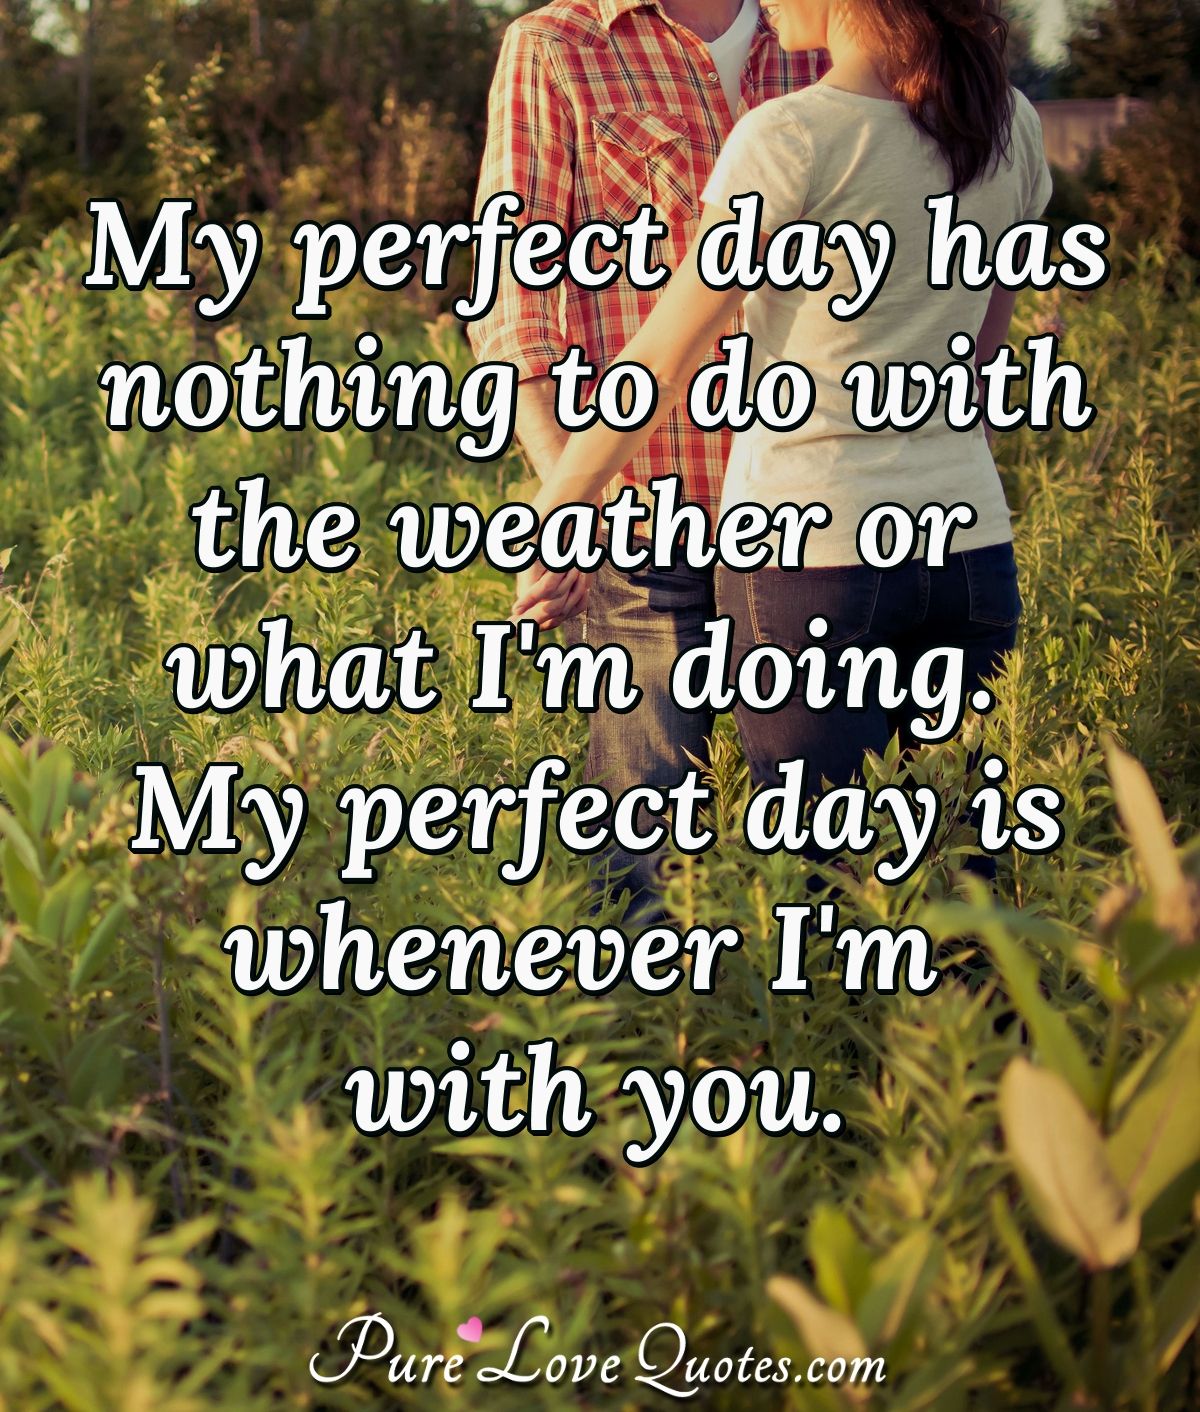 My perfect day has nothing to do with the weather or what I'm doing. My perfect day is whenever I'm with you. - Anonymous